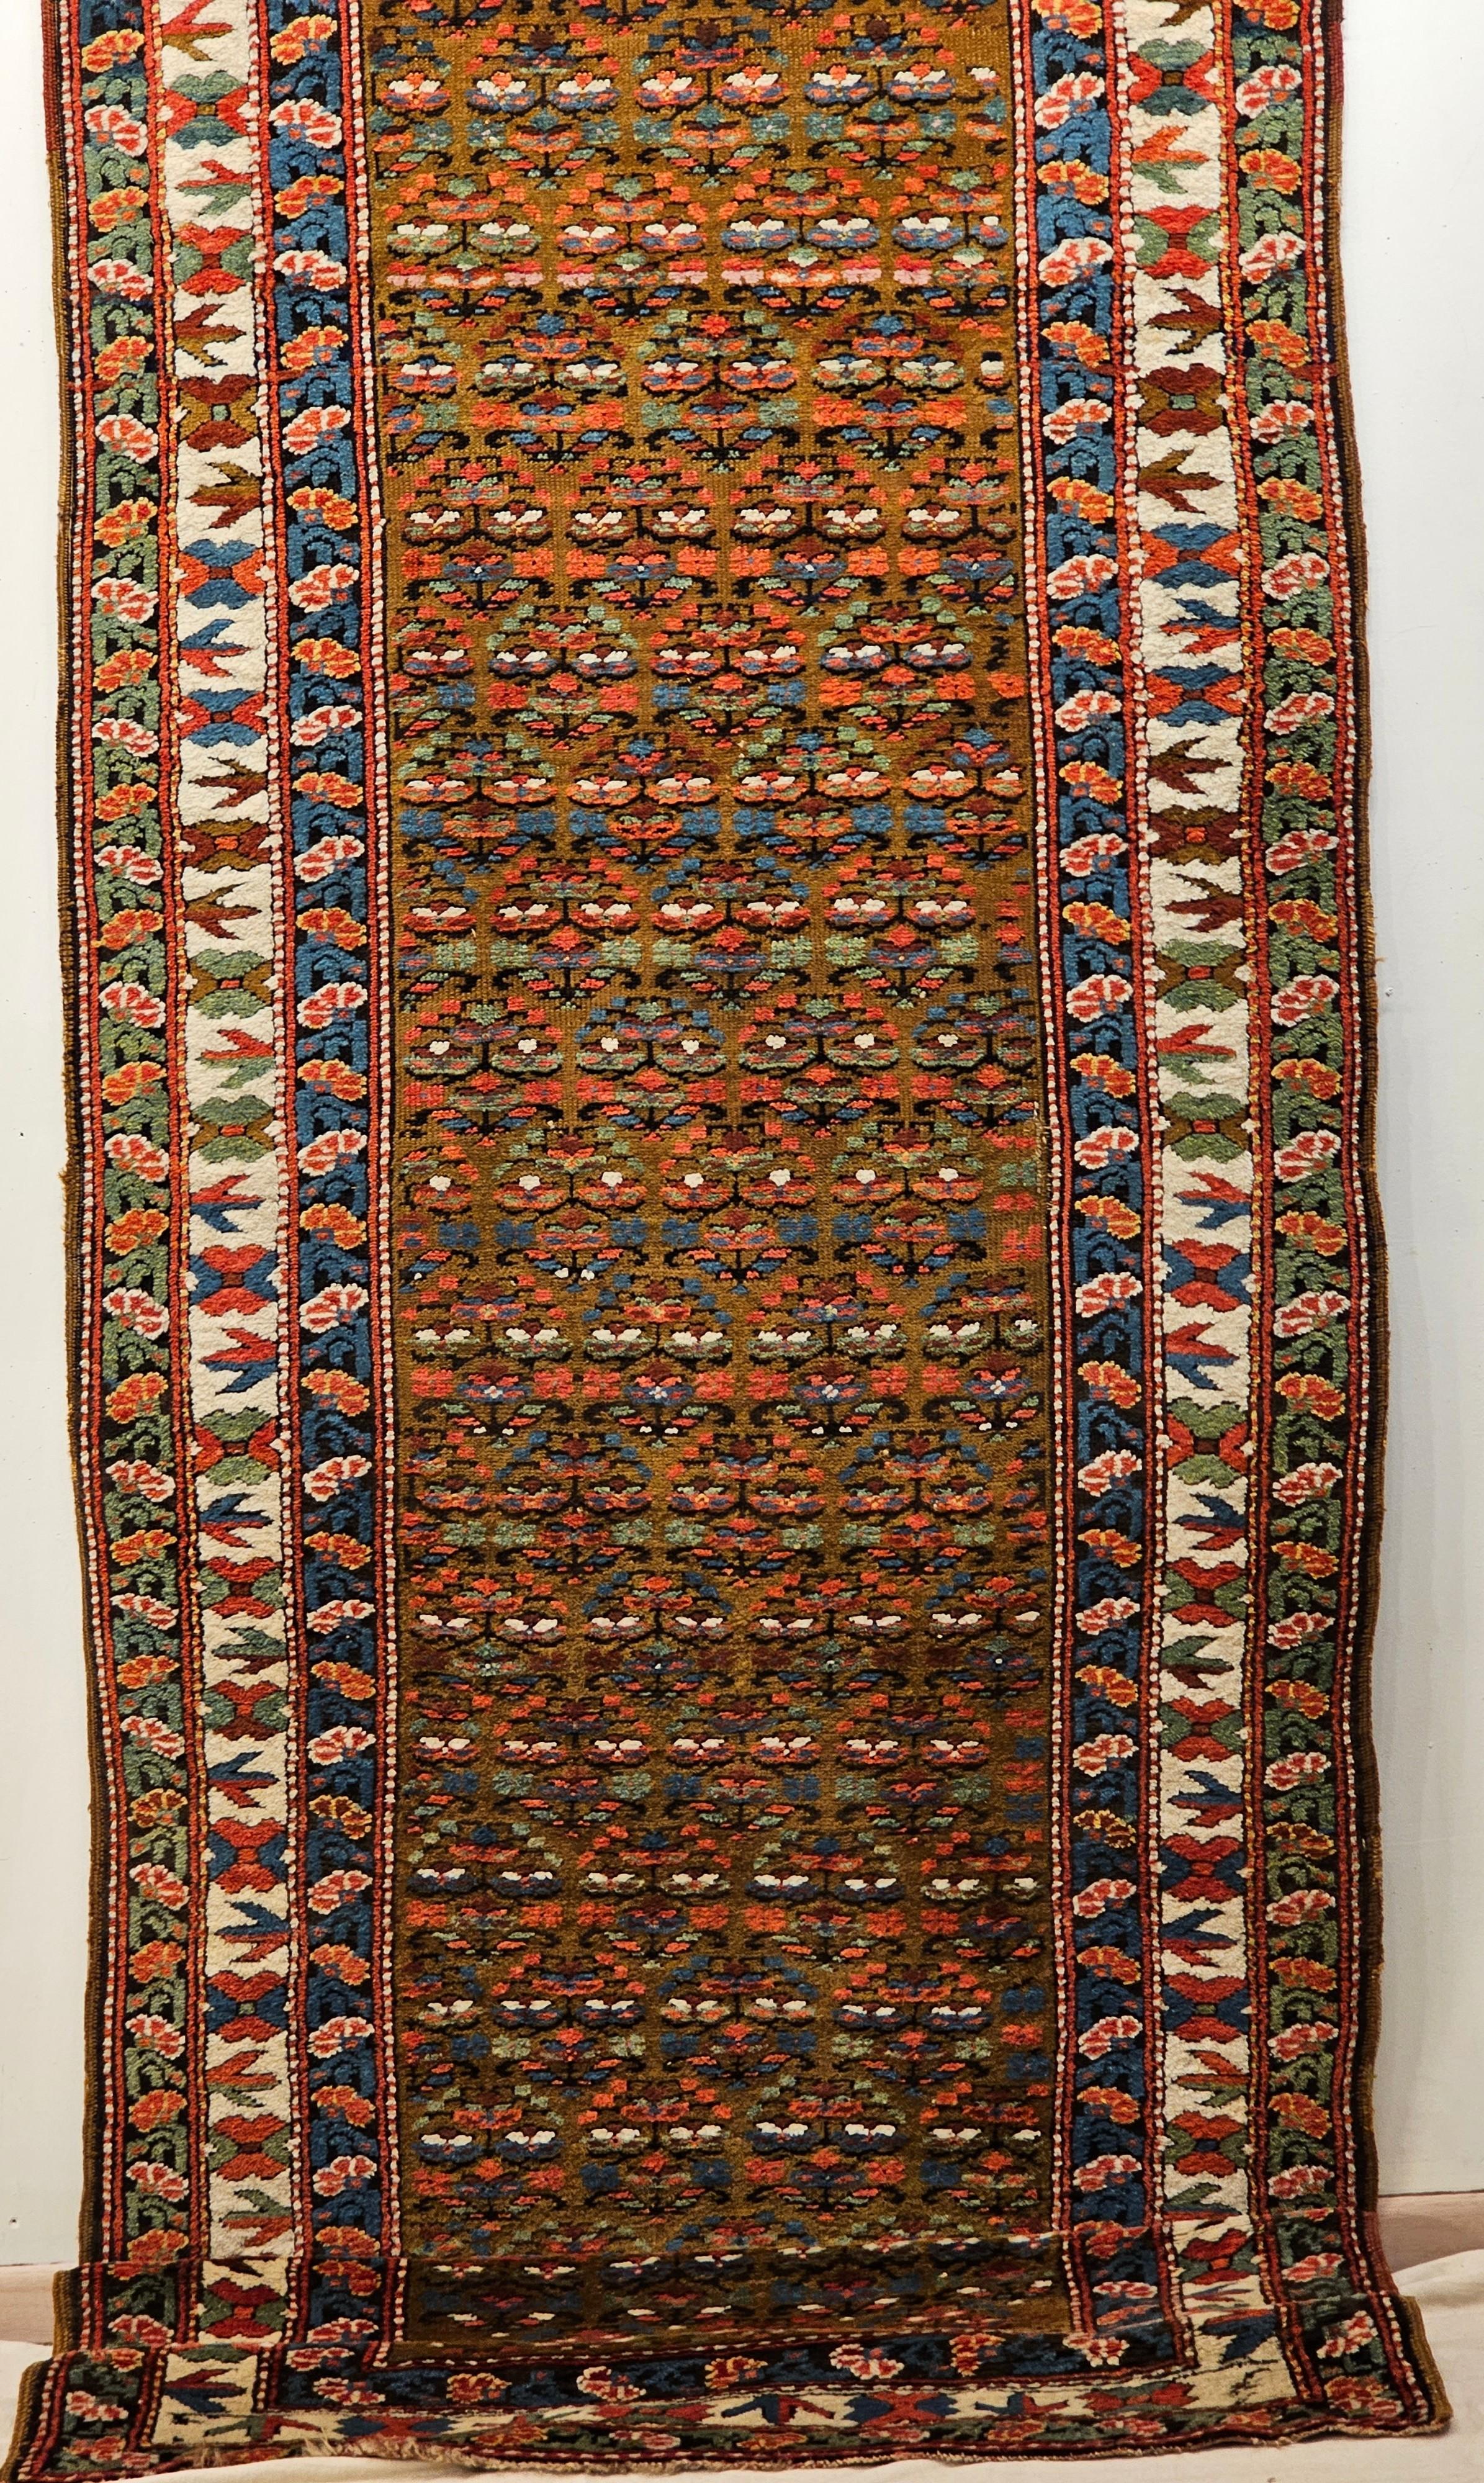 Persian Kurdish Camelhair runner in an allover small flower head pattern (a variation on paisley design) from the early 1900s. The field contains rows of the flower design in green, blue, red and ivory.  The rug has a wonderful triple border.  The